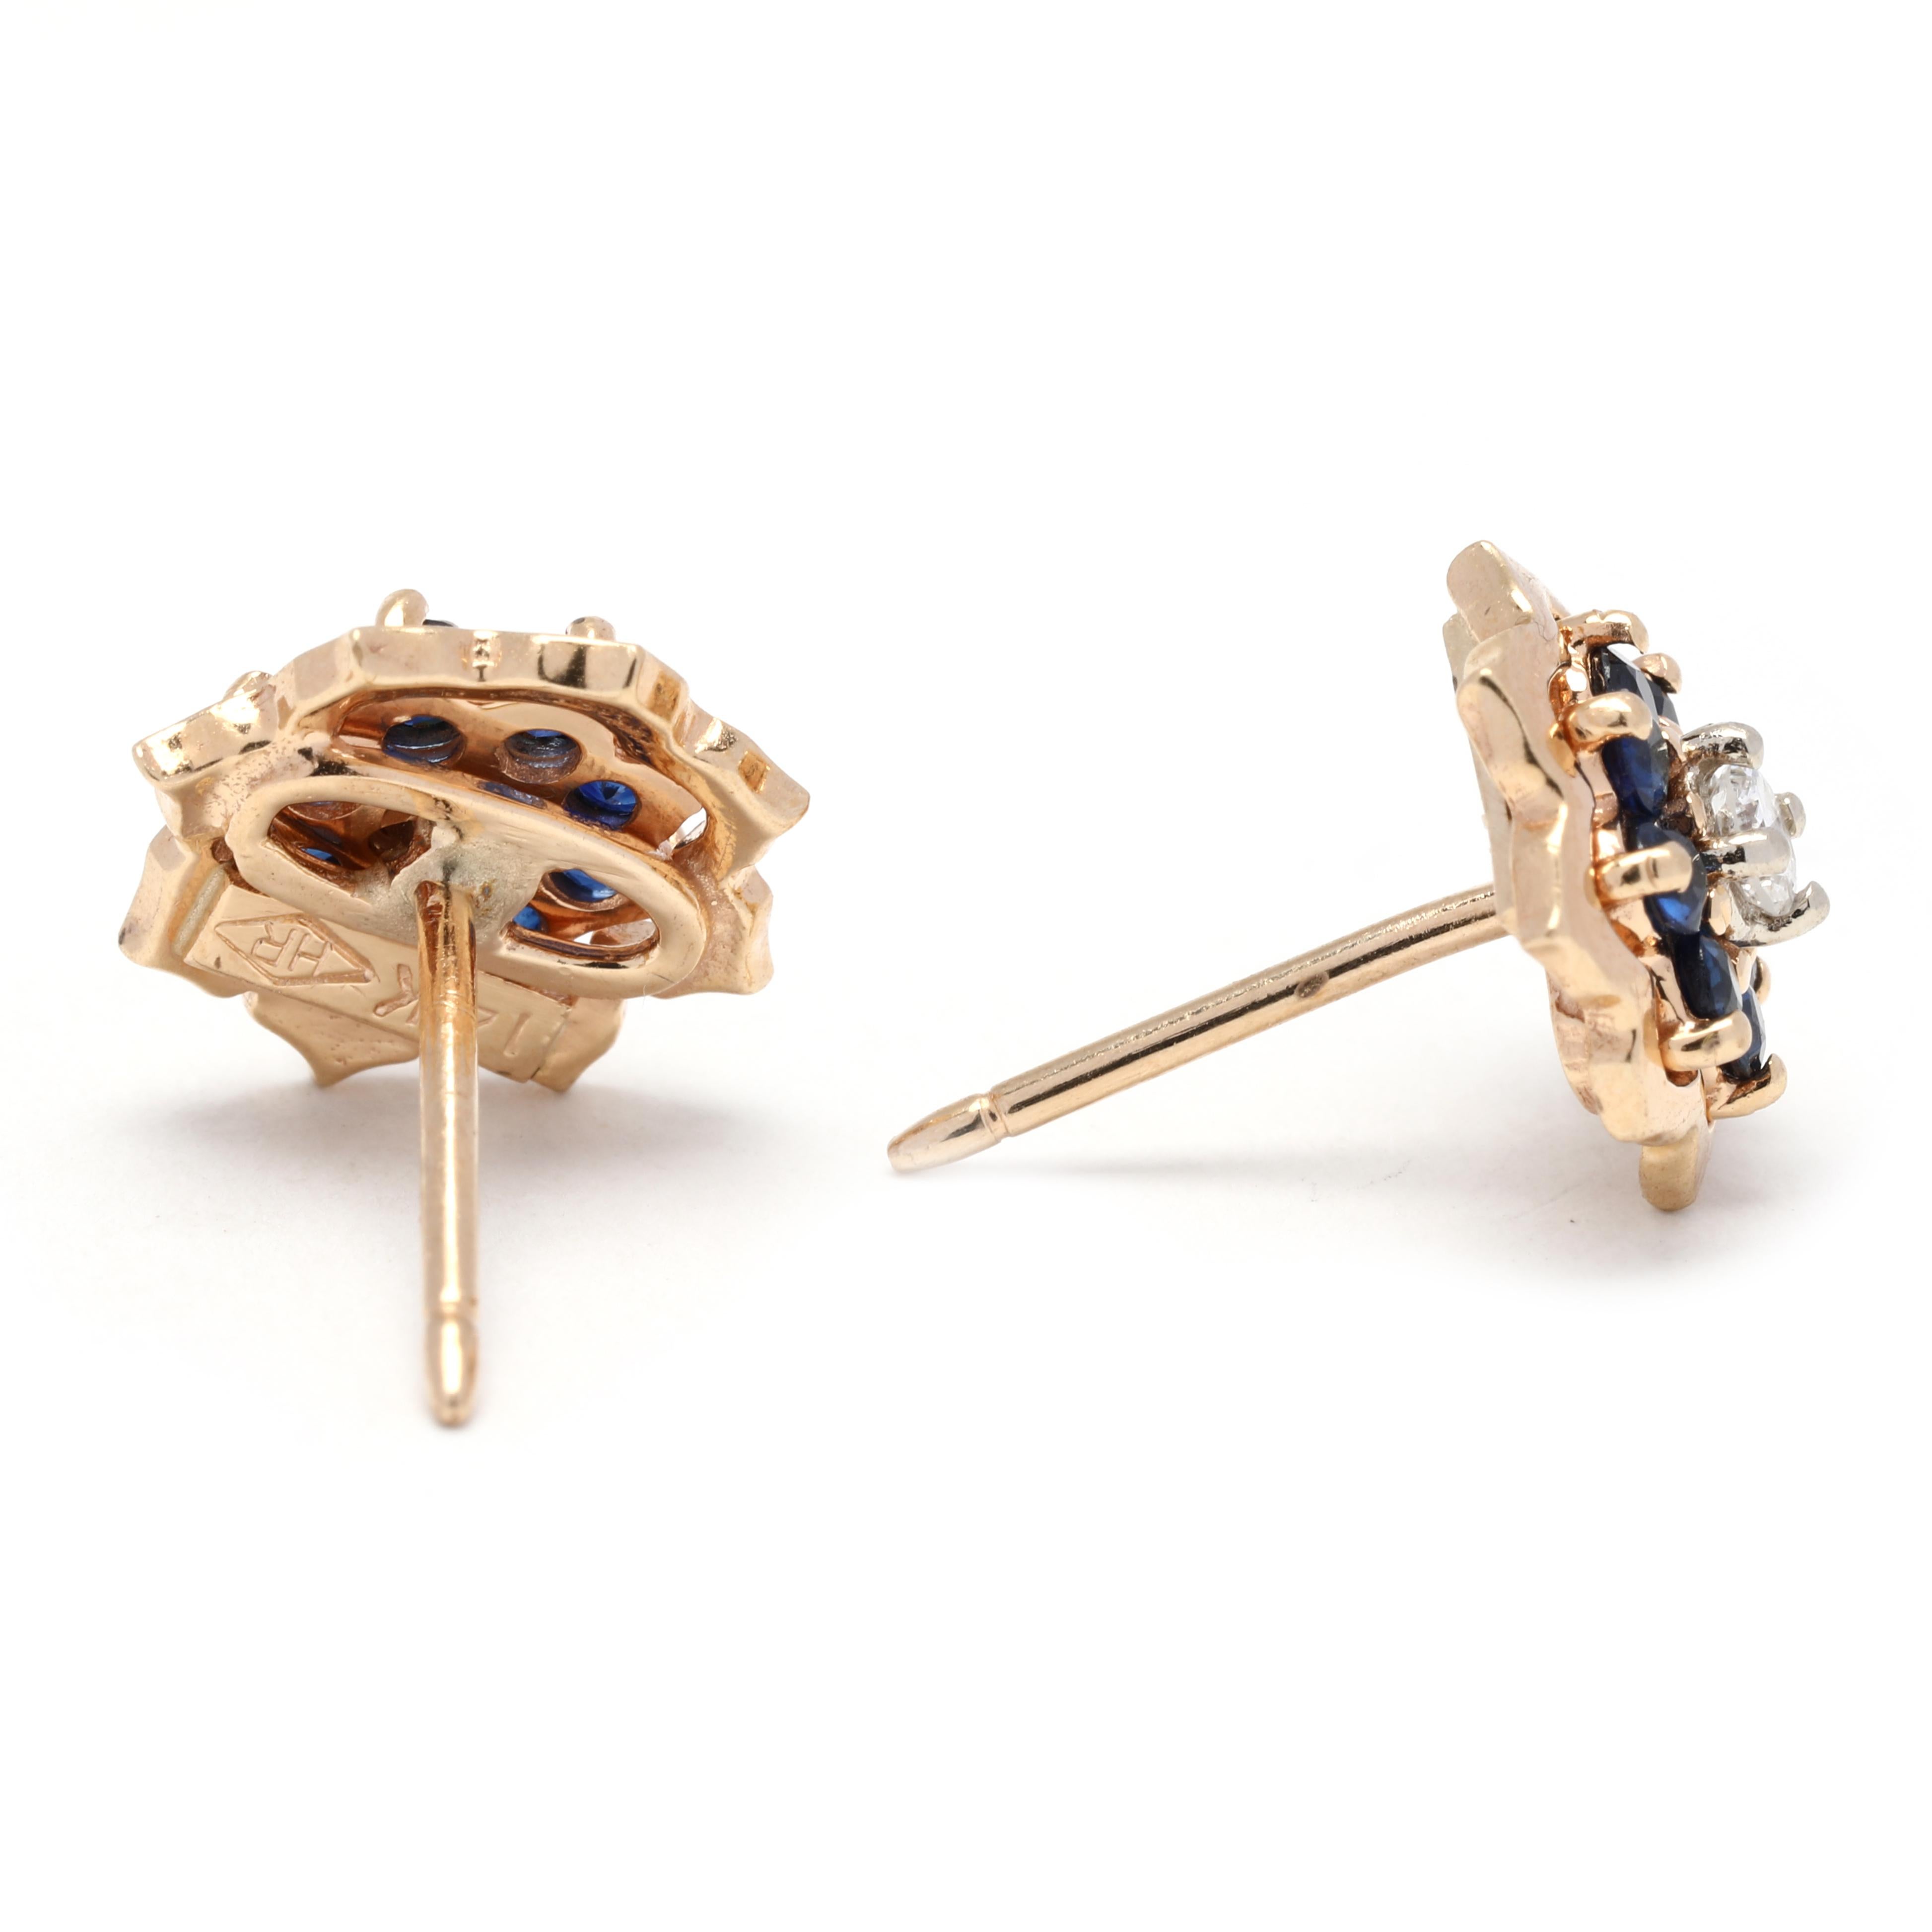 These stunning 0.62ctw diamond and sapphire flower stud earrings will add a touch of elegance to any outfit. Crafted in 14K yellow gold, these delicate earrings measure 3/8 inches in length and feature a sparkling diamond cluster center. Perfect for